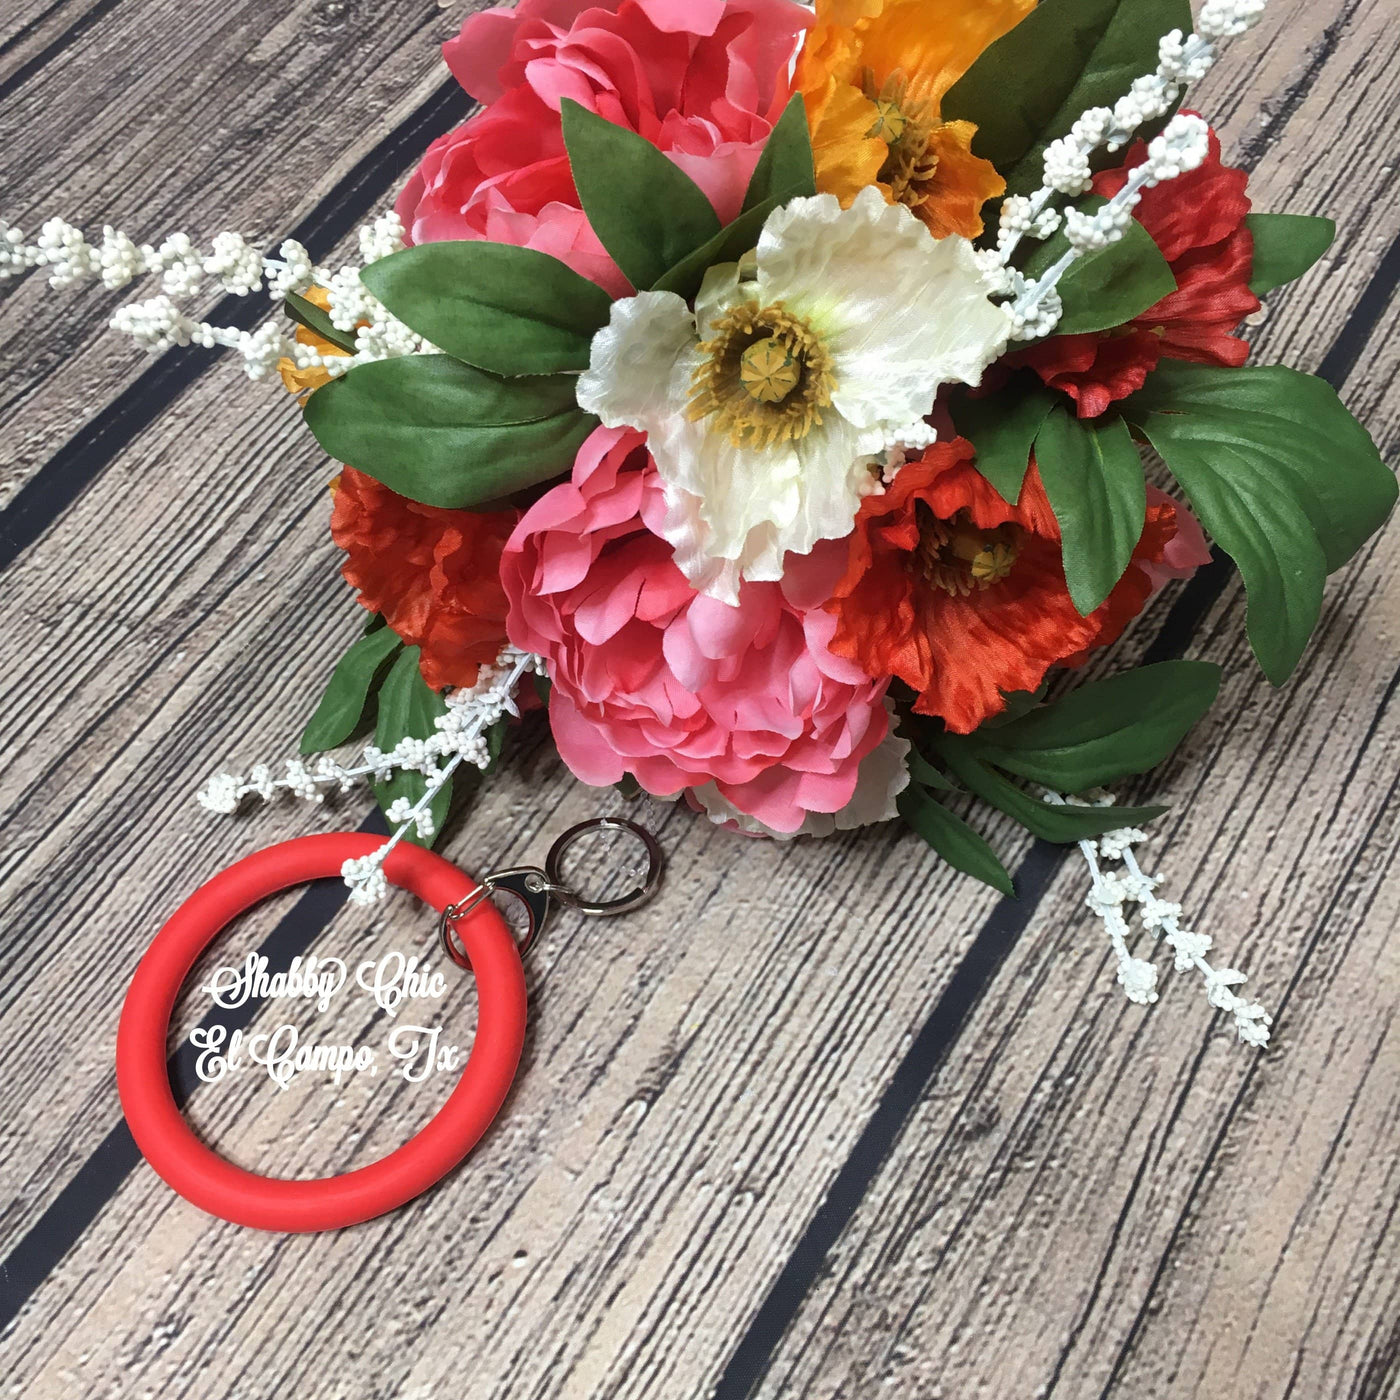 Silicone Bracelet Key Ring Shabby Chic Boutique and Tanning Salon Red